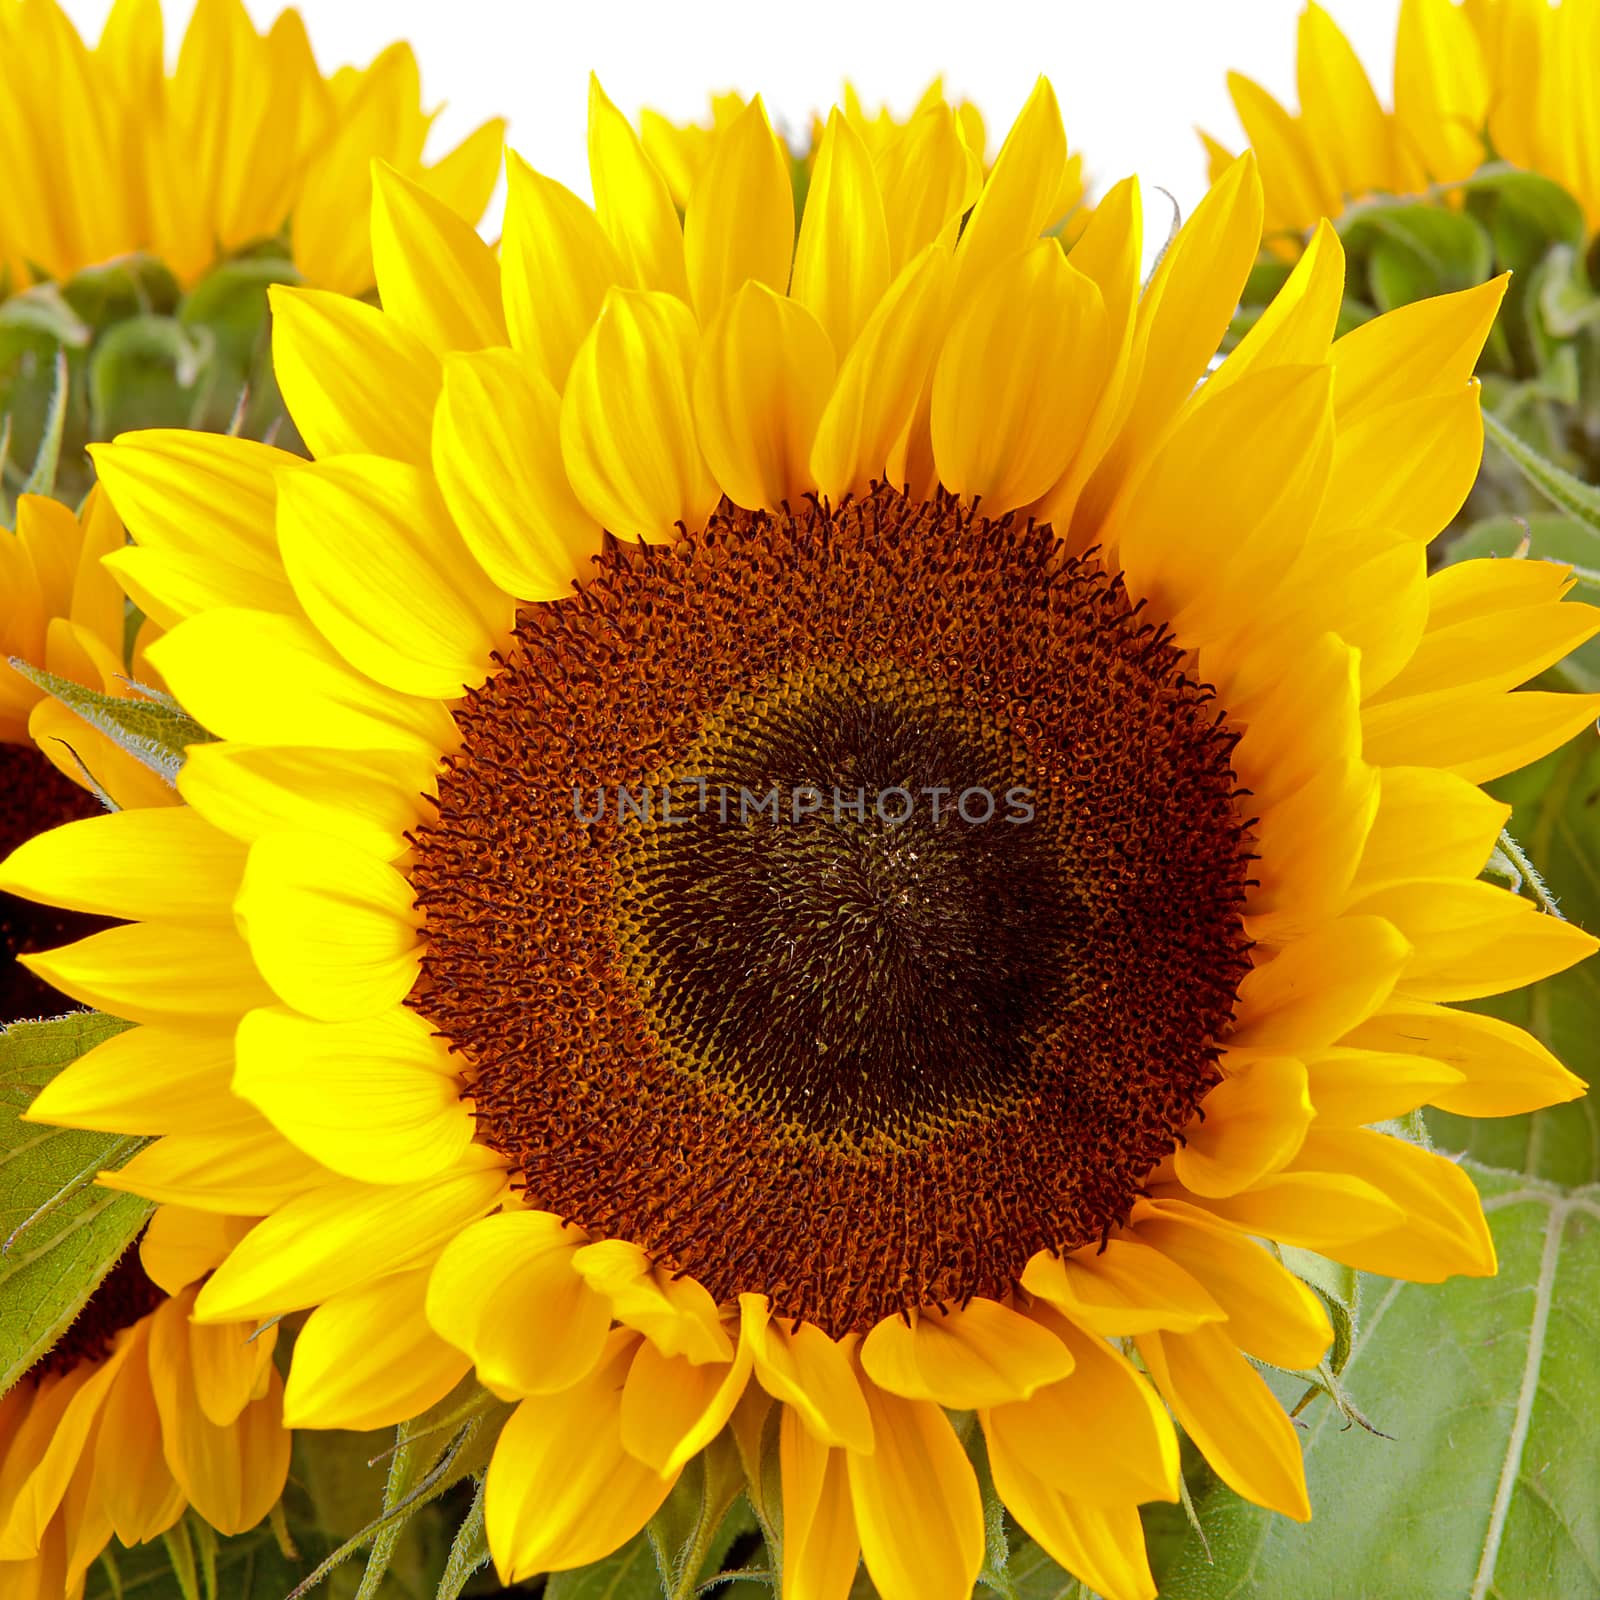 Bouquet of sunflowers in closeup over white background